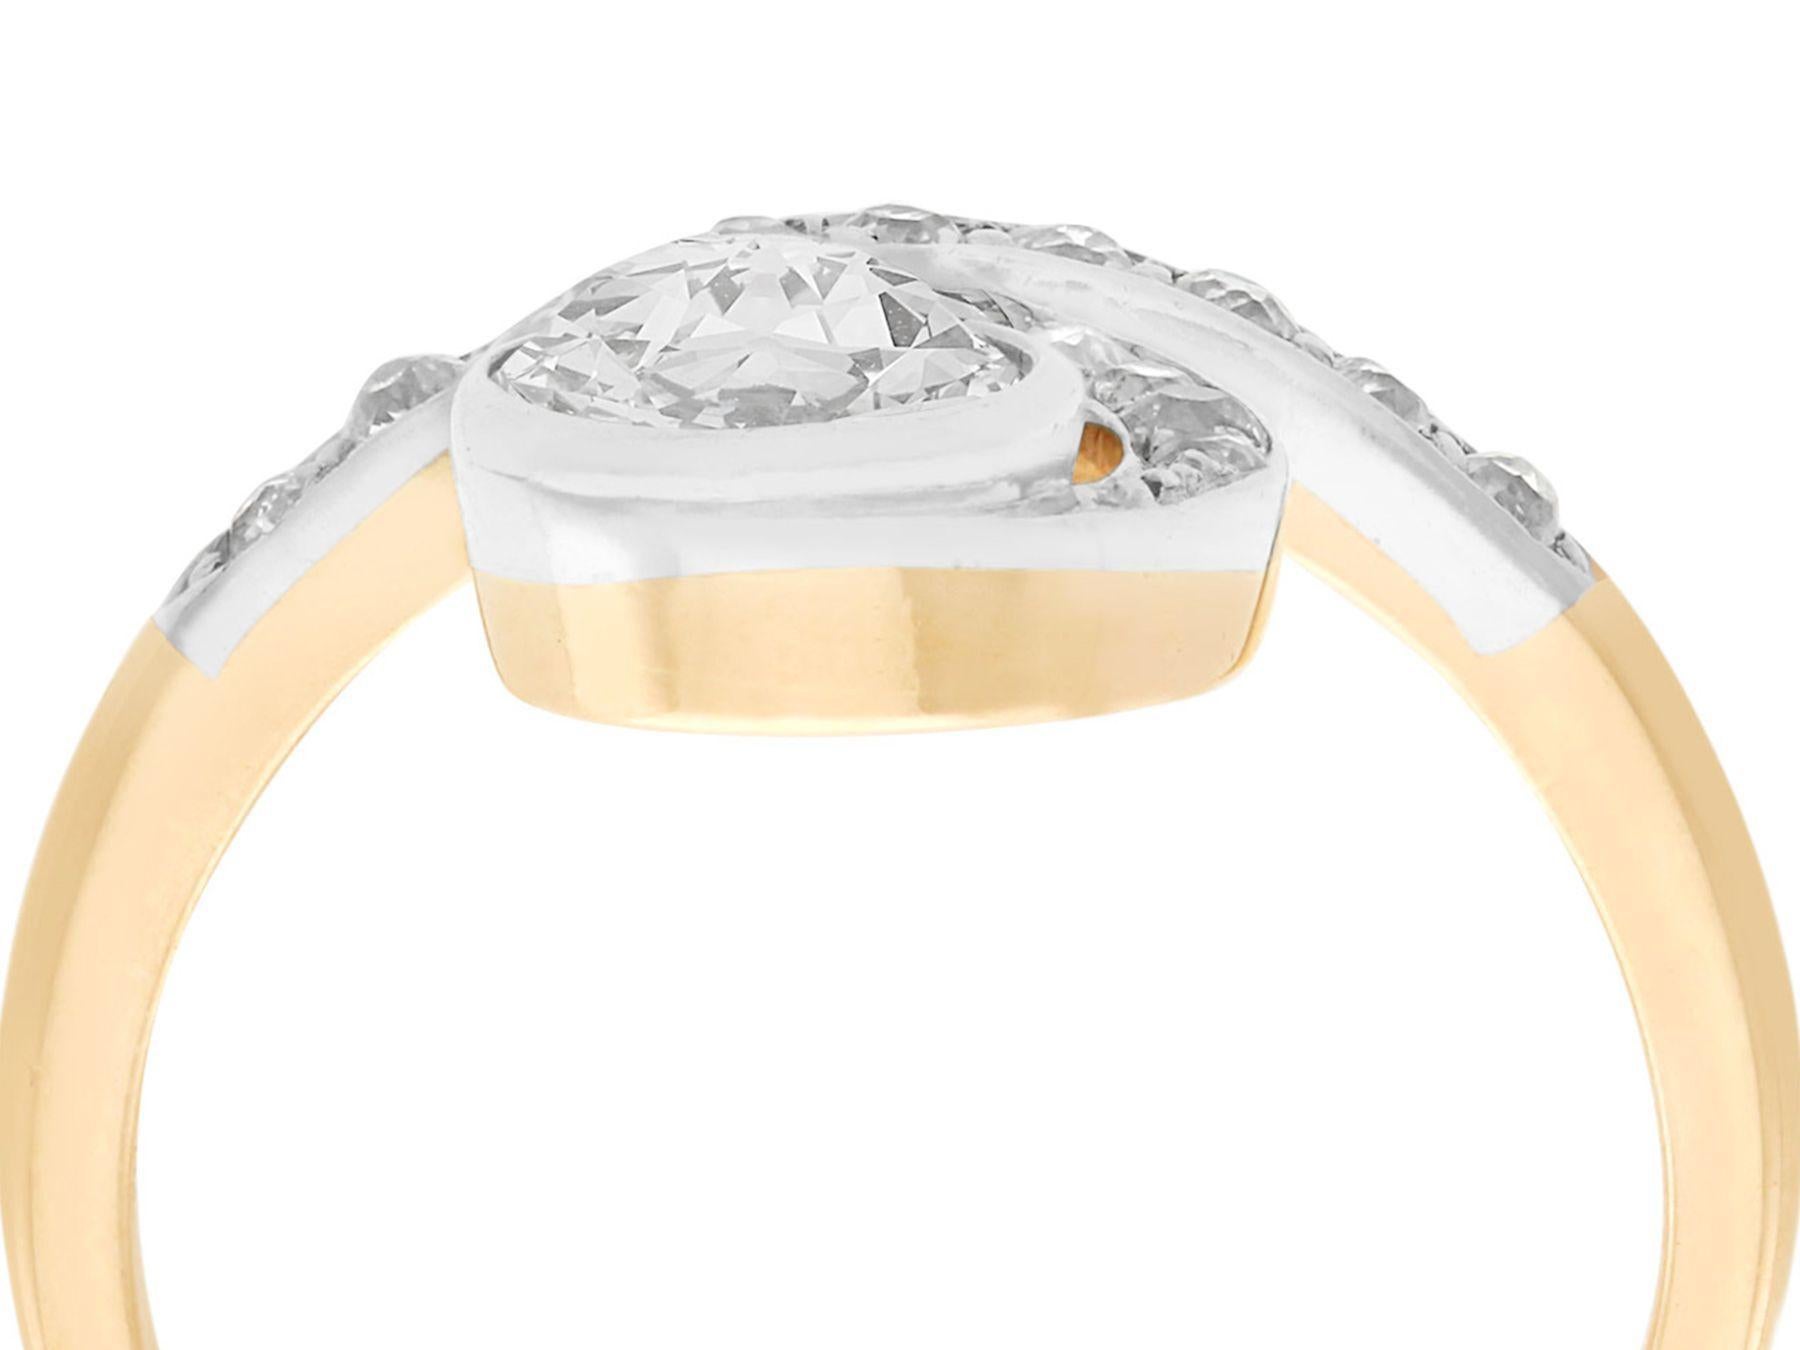 A stunning, fine and impressive 1.60 carat diamond and 12 karat yellow gold, silver set twist style cocktail ring; part of our diverse antique jewelry and estate jewelry collections

This stunning, fine and impressive antique diamond cocktail ring